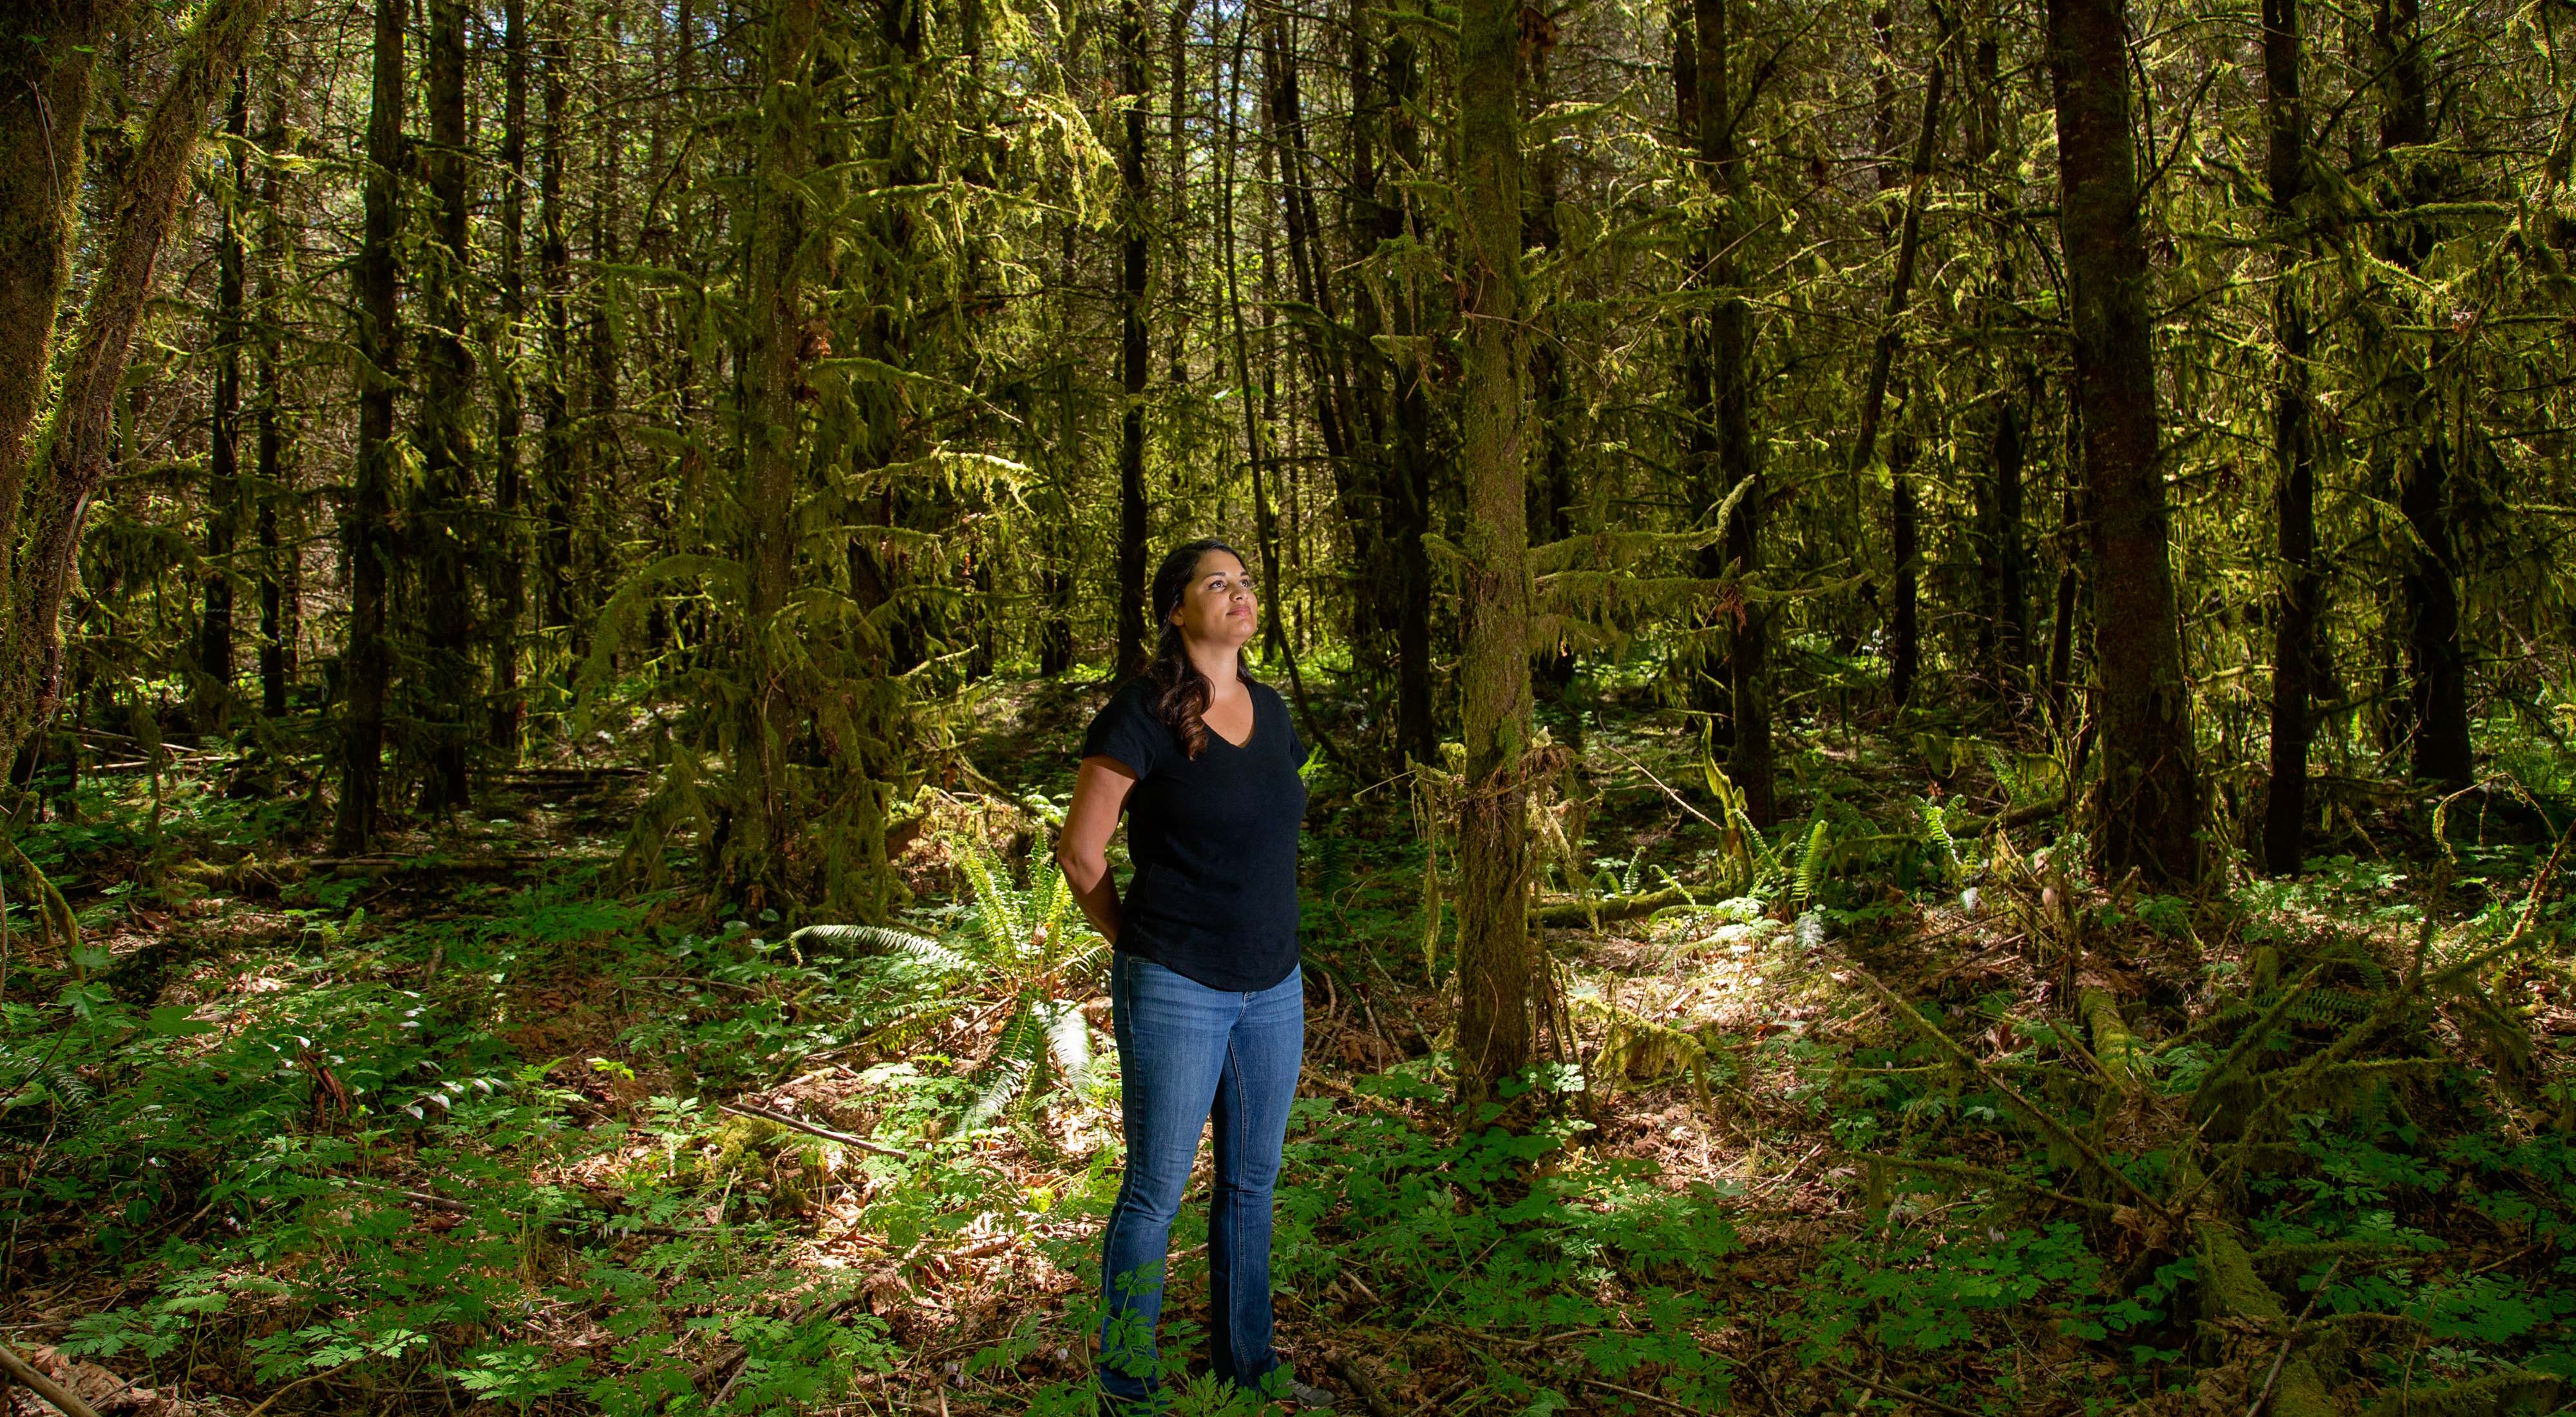 Kenison stands with hands behind her back and head raised in dense green forest in a column of sunlight